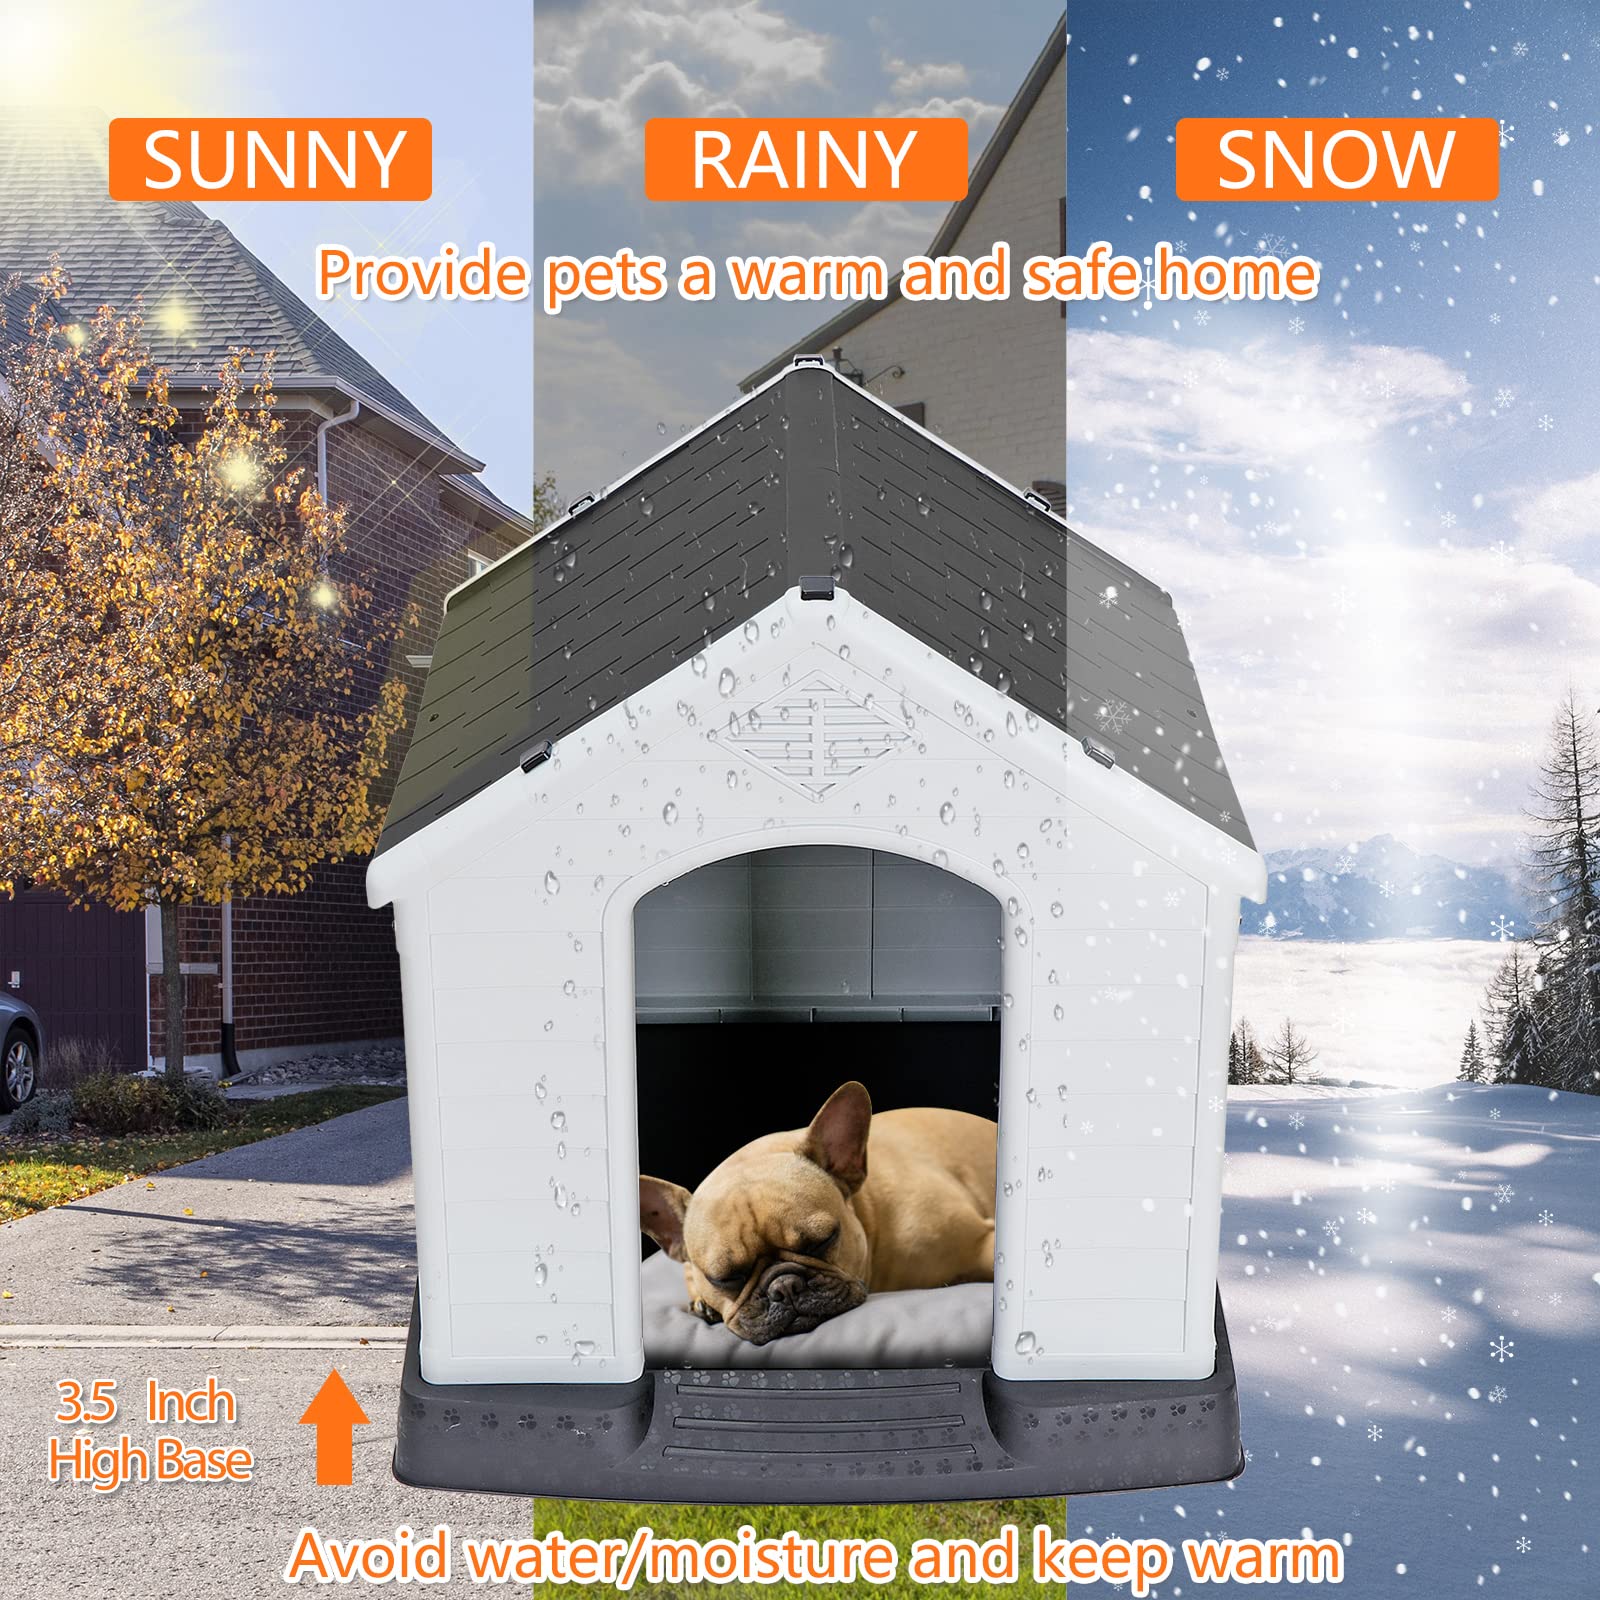 Pet Republic Large Plastic Dog House Indoor Outdoor Doghouse Dog Kennel Easy to Assemble Puppy Shelter w/Air Vents Elevated Floor Waterproof